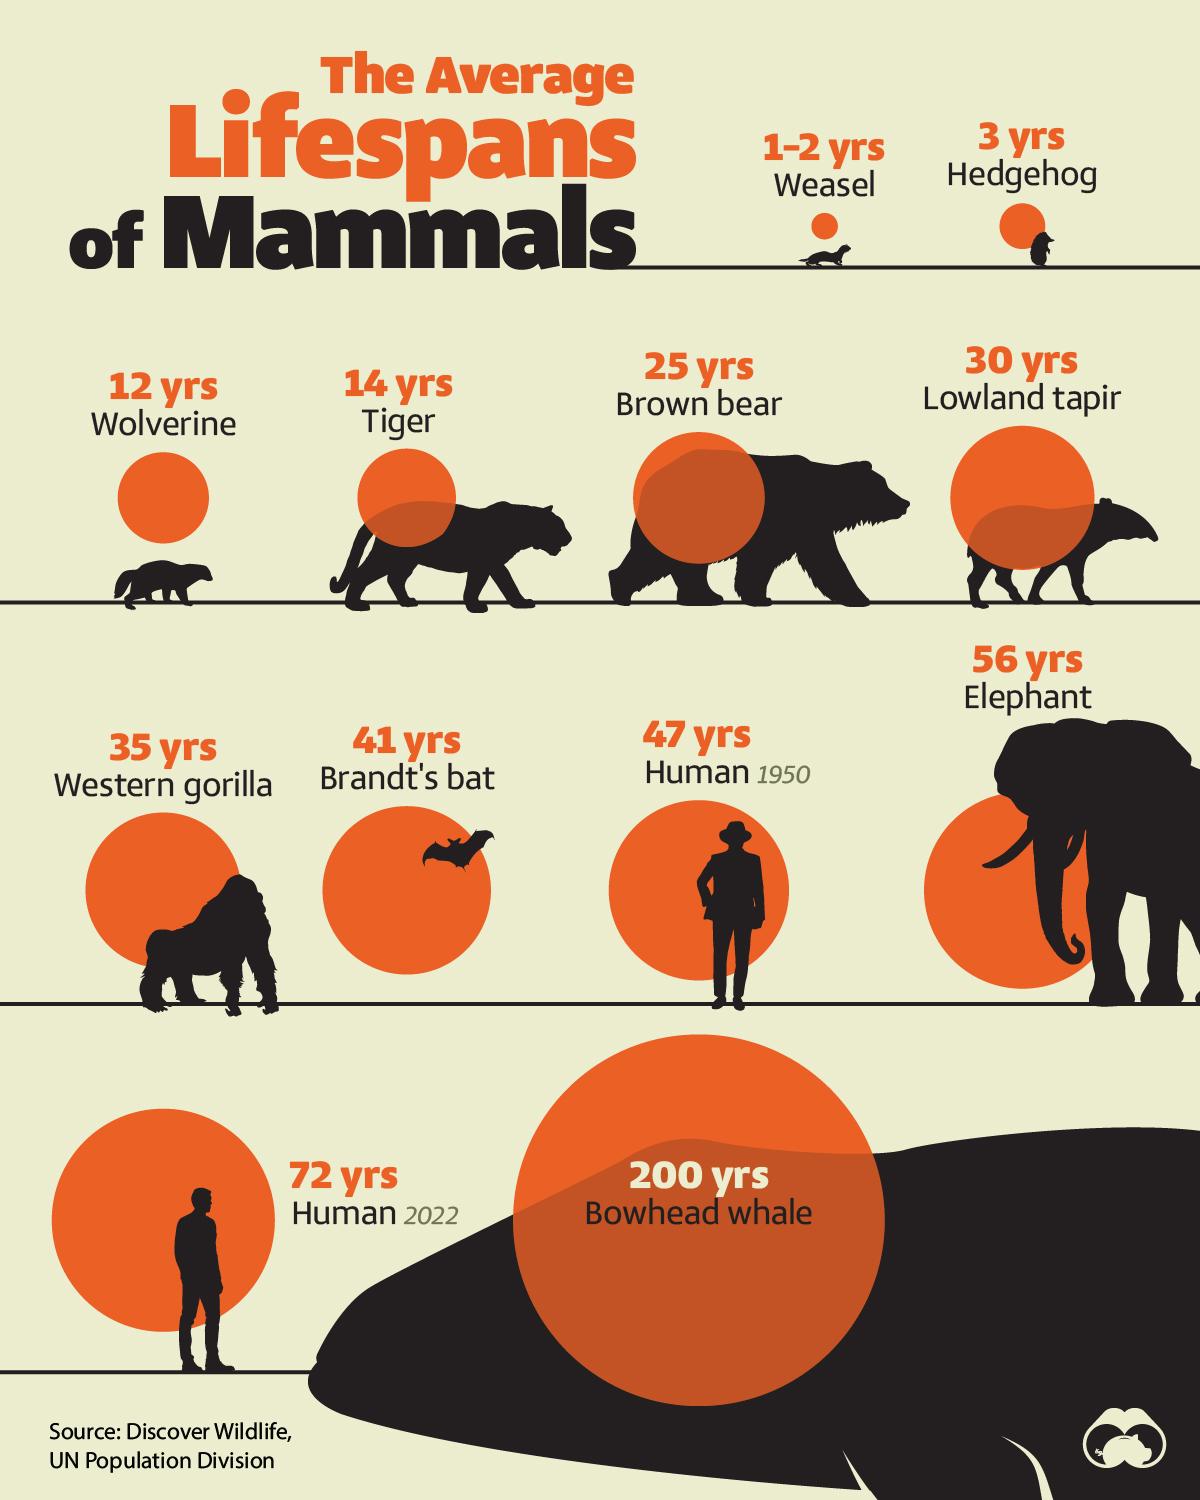 How Human Lifespans Compare to Other Mammals